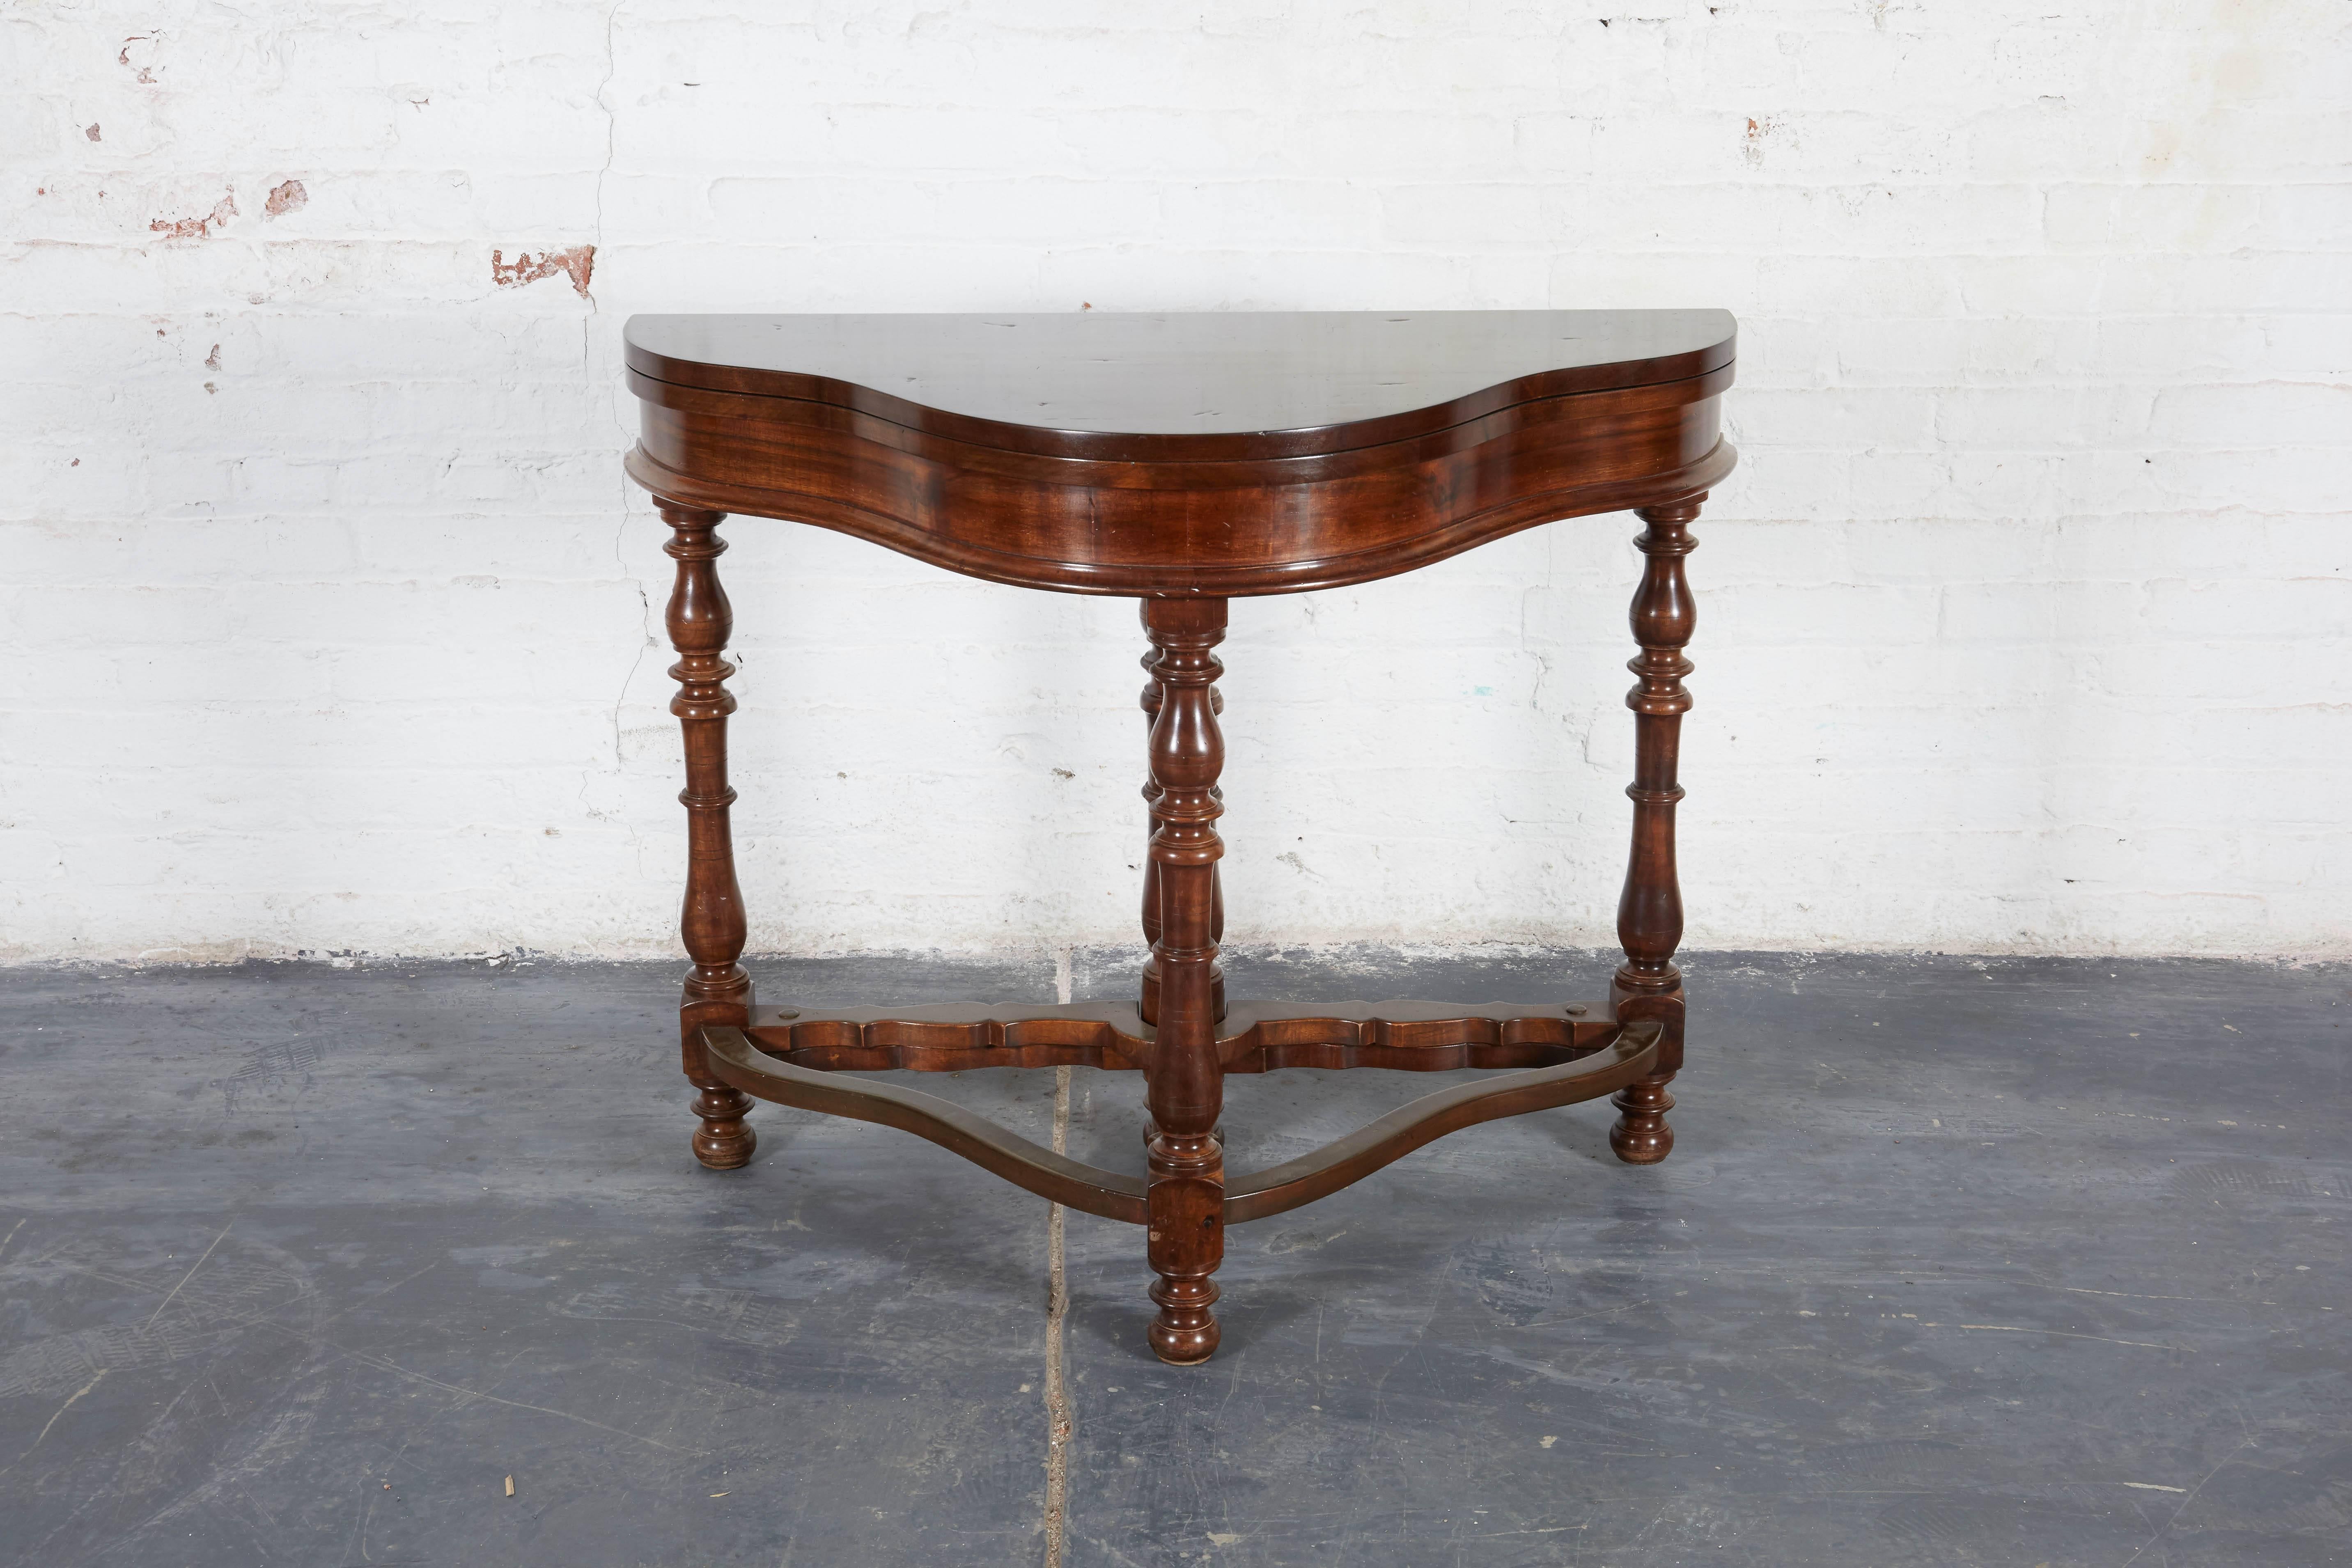 Each with shaped hinged top opening to a quatrefoil shape; raised on turned baluster form pages joined by stretchers. Lovely sculptural Silhouette and modern in its lack of embellishment.